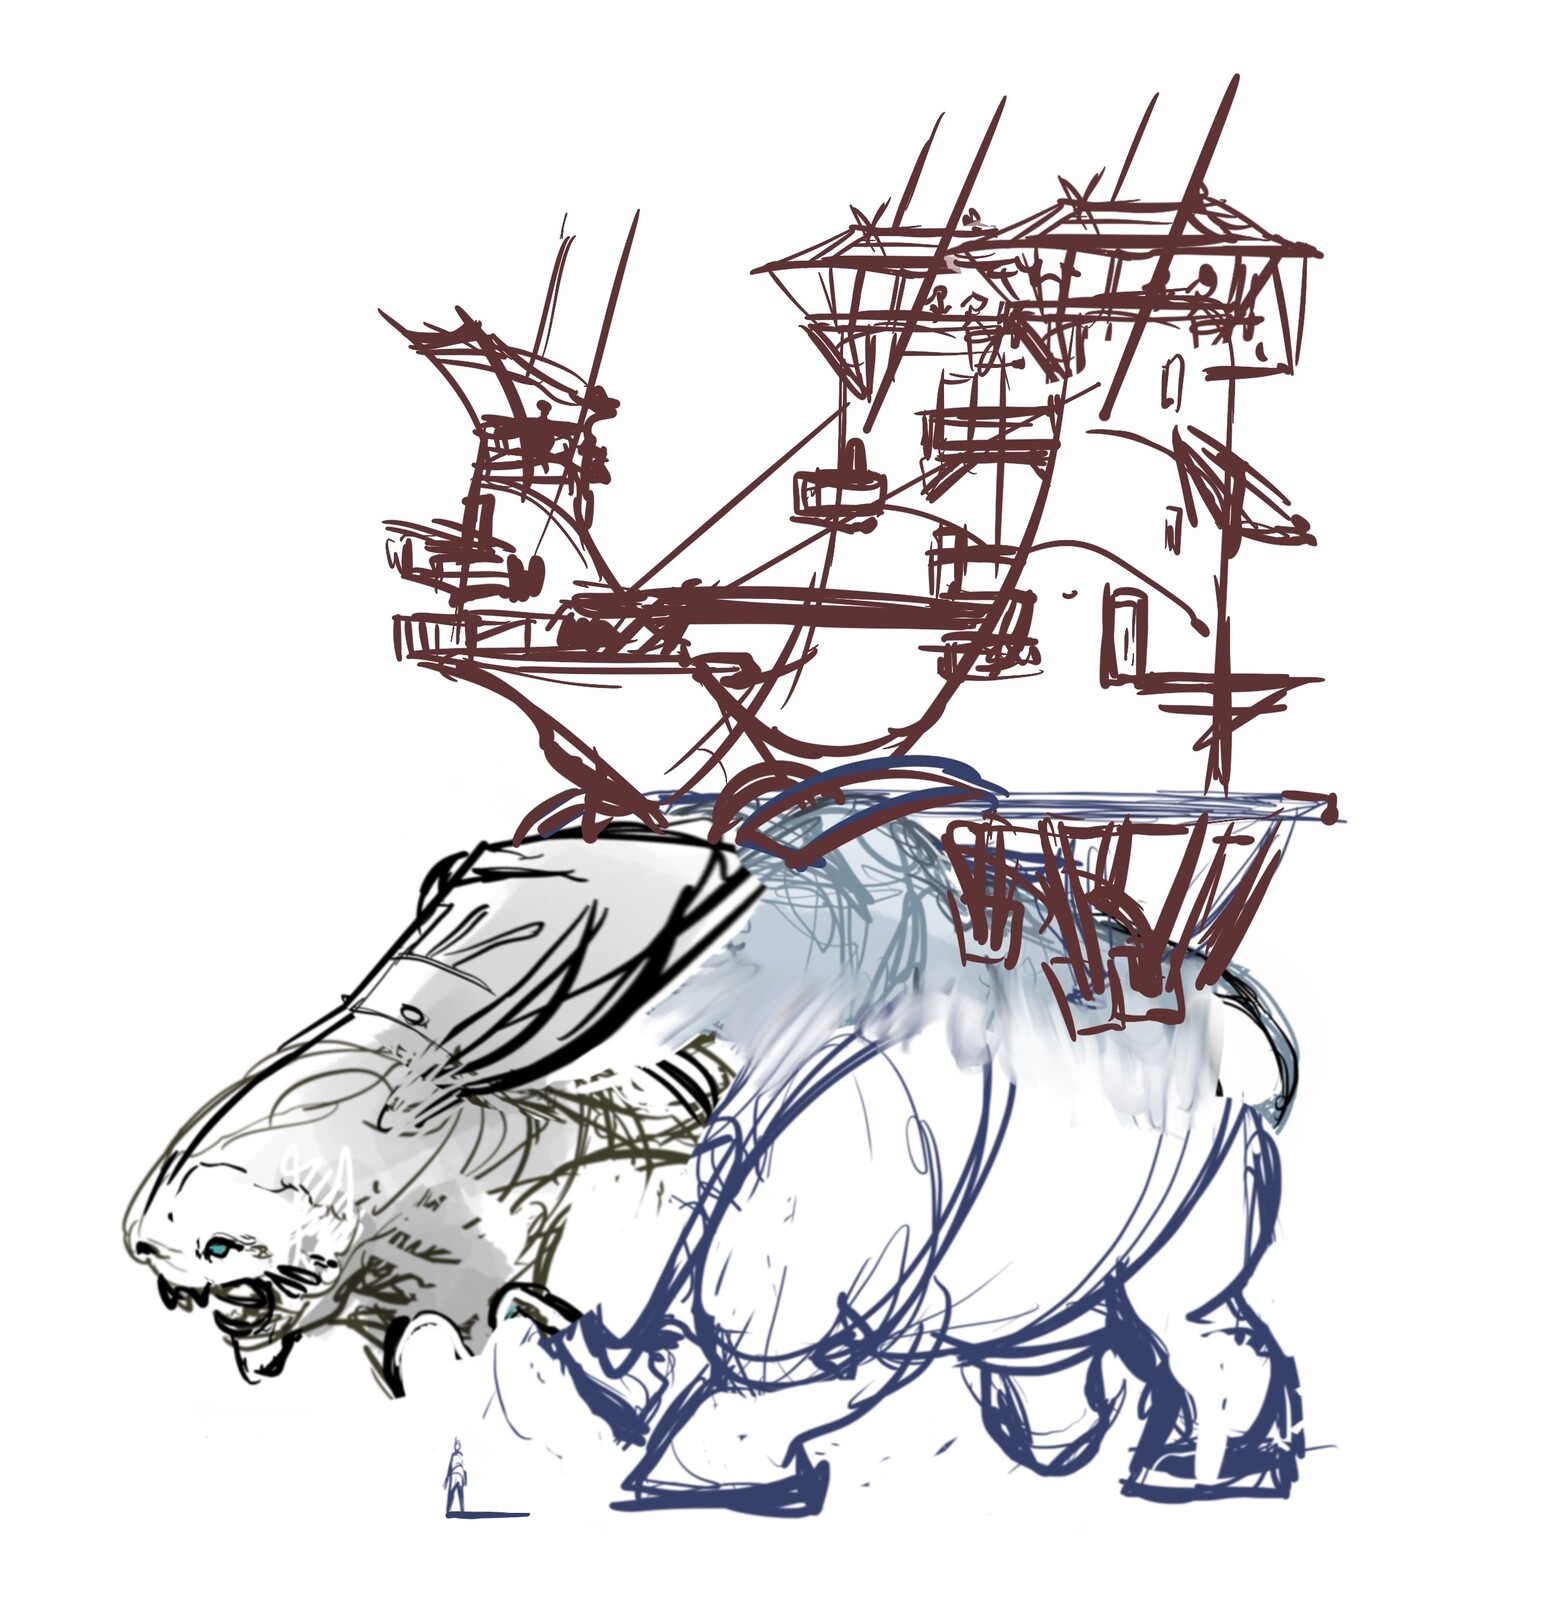 A second howdah sketch. Again with figure to show scale.